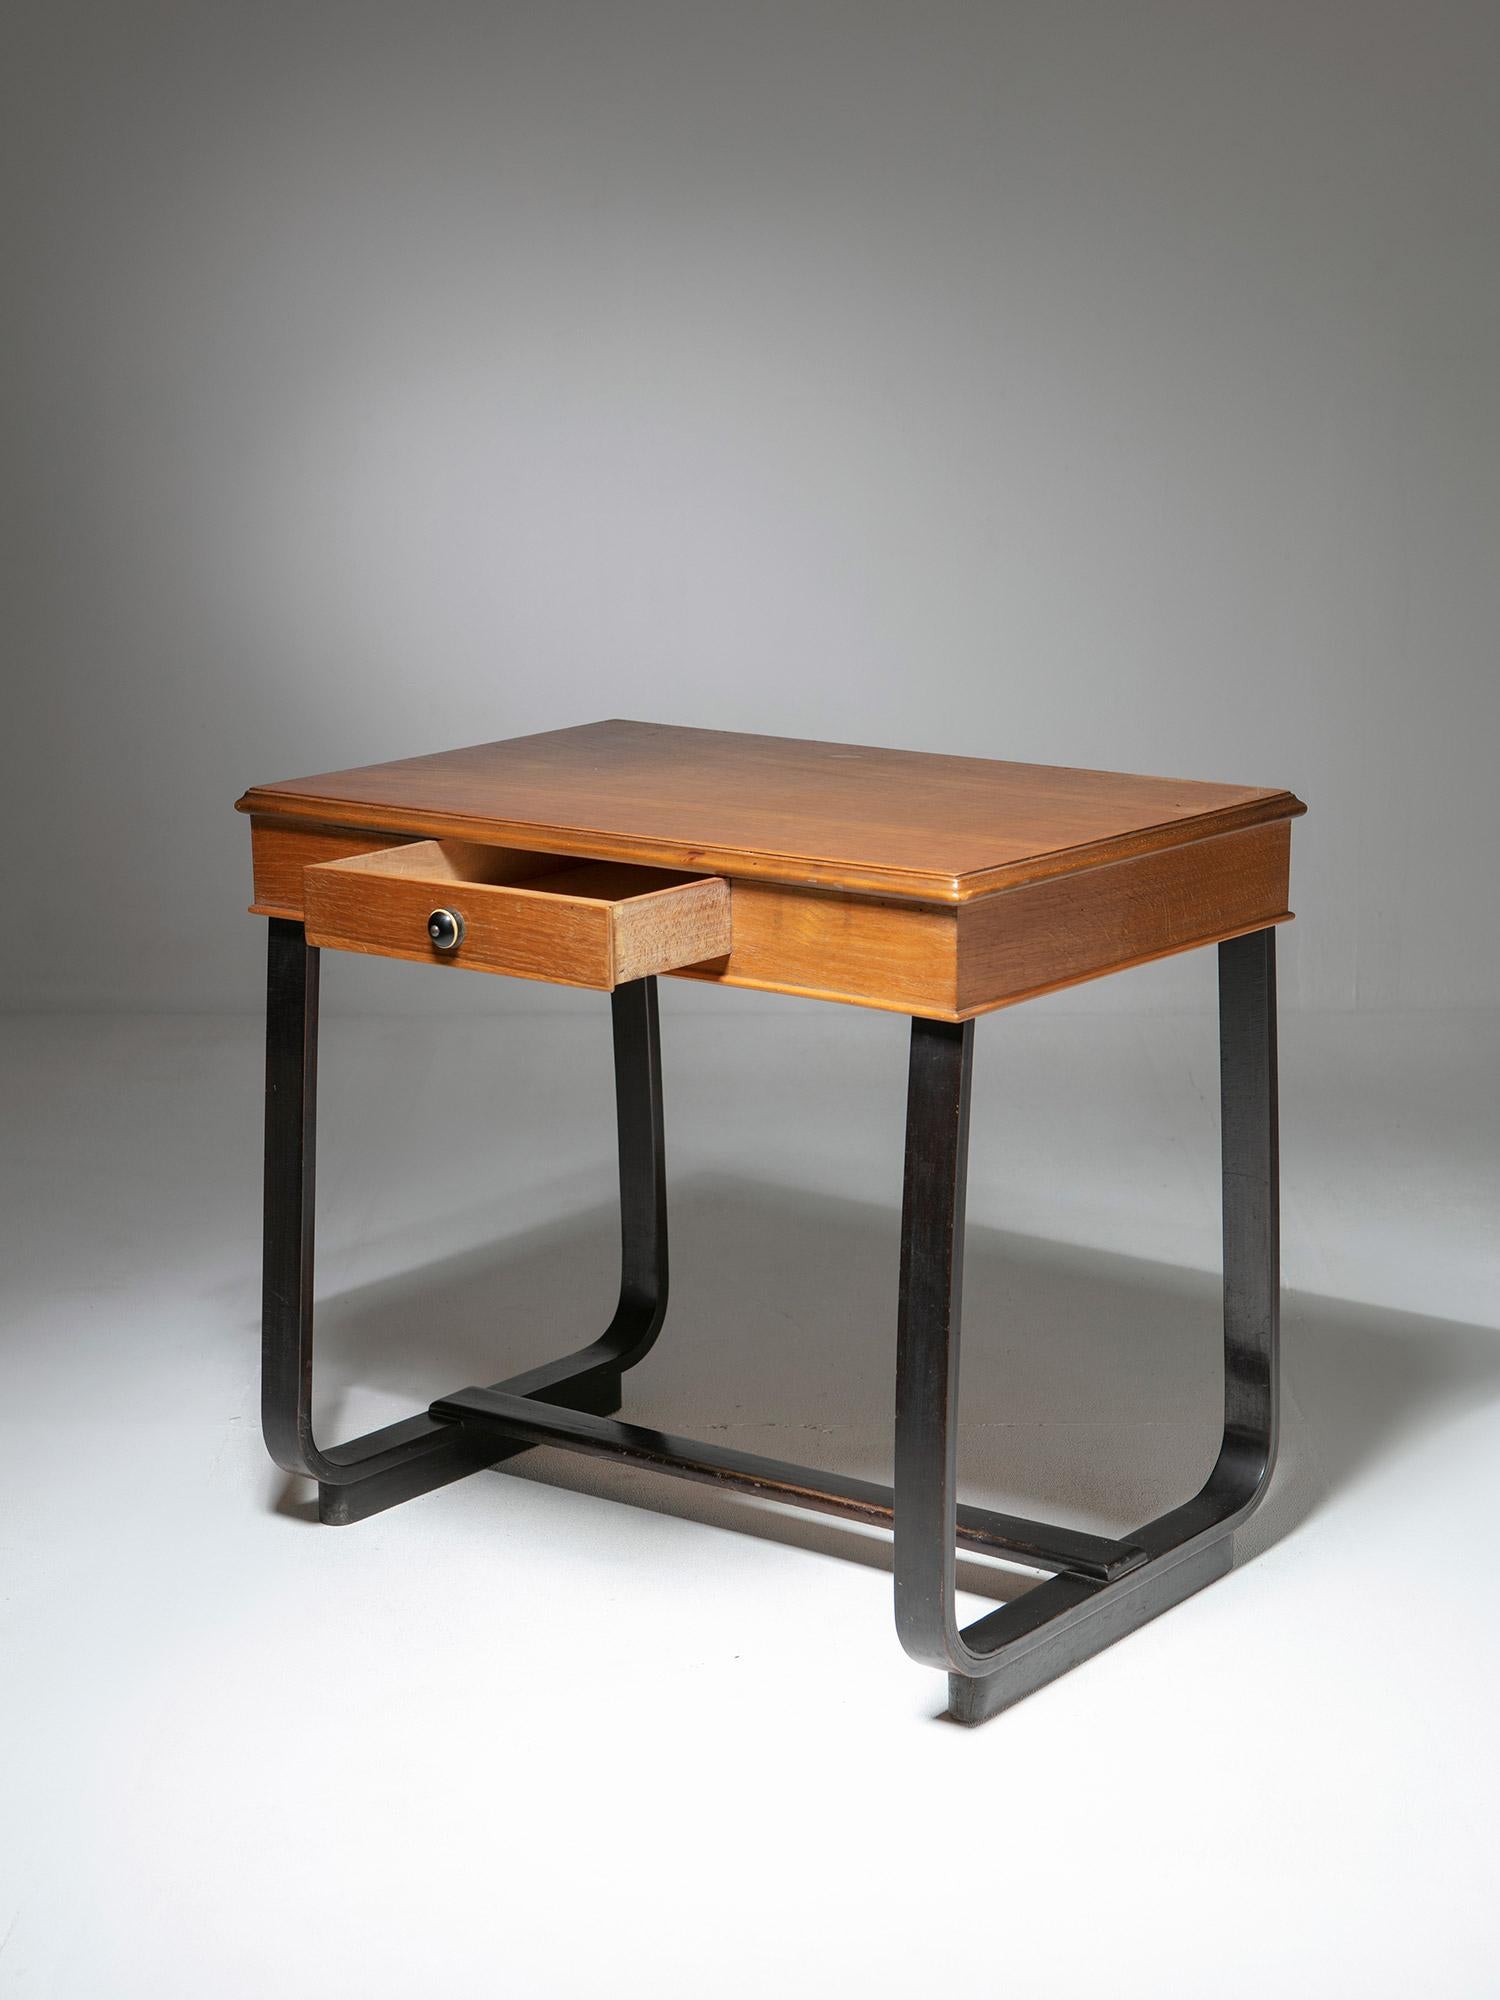 Italian Rationalist Compact Plywood Desk with Drawer, Italy 1940s For Sale